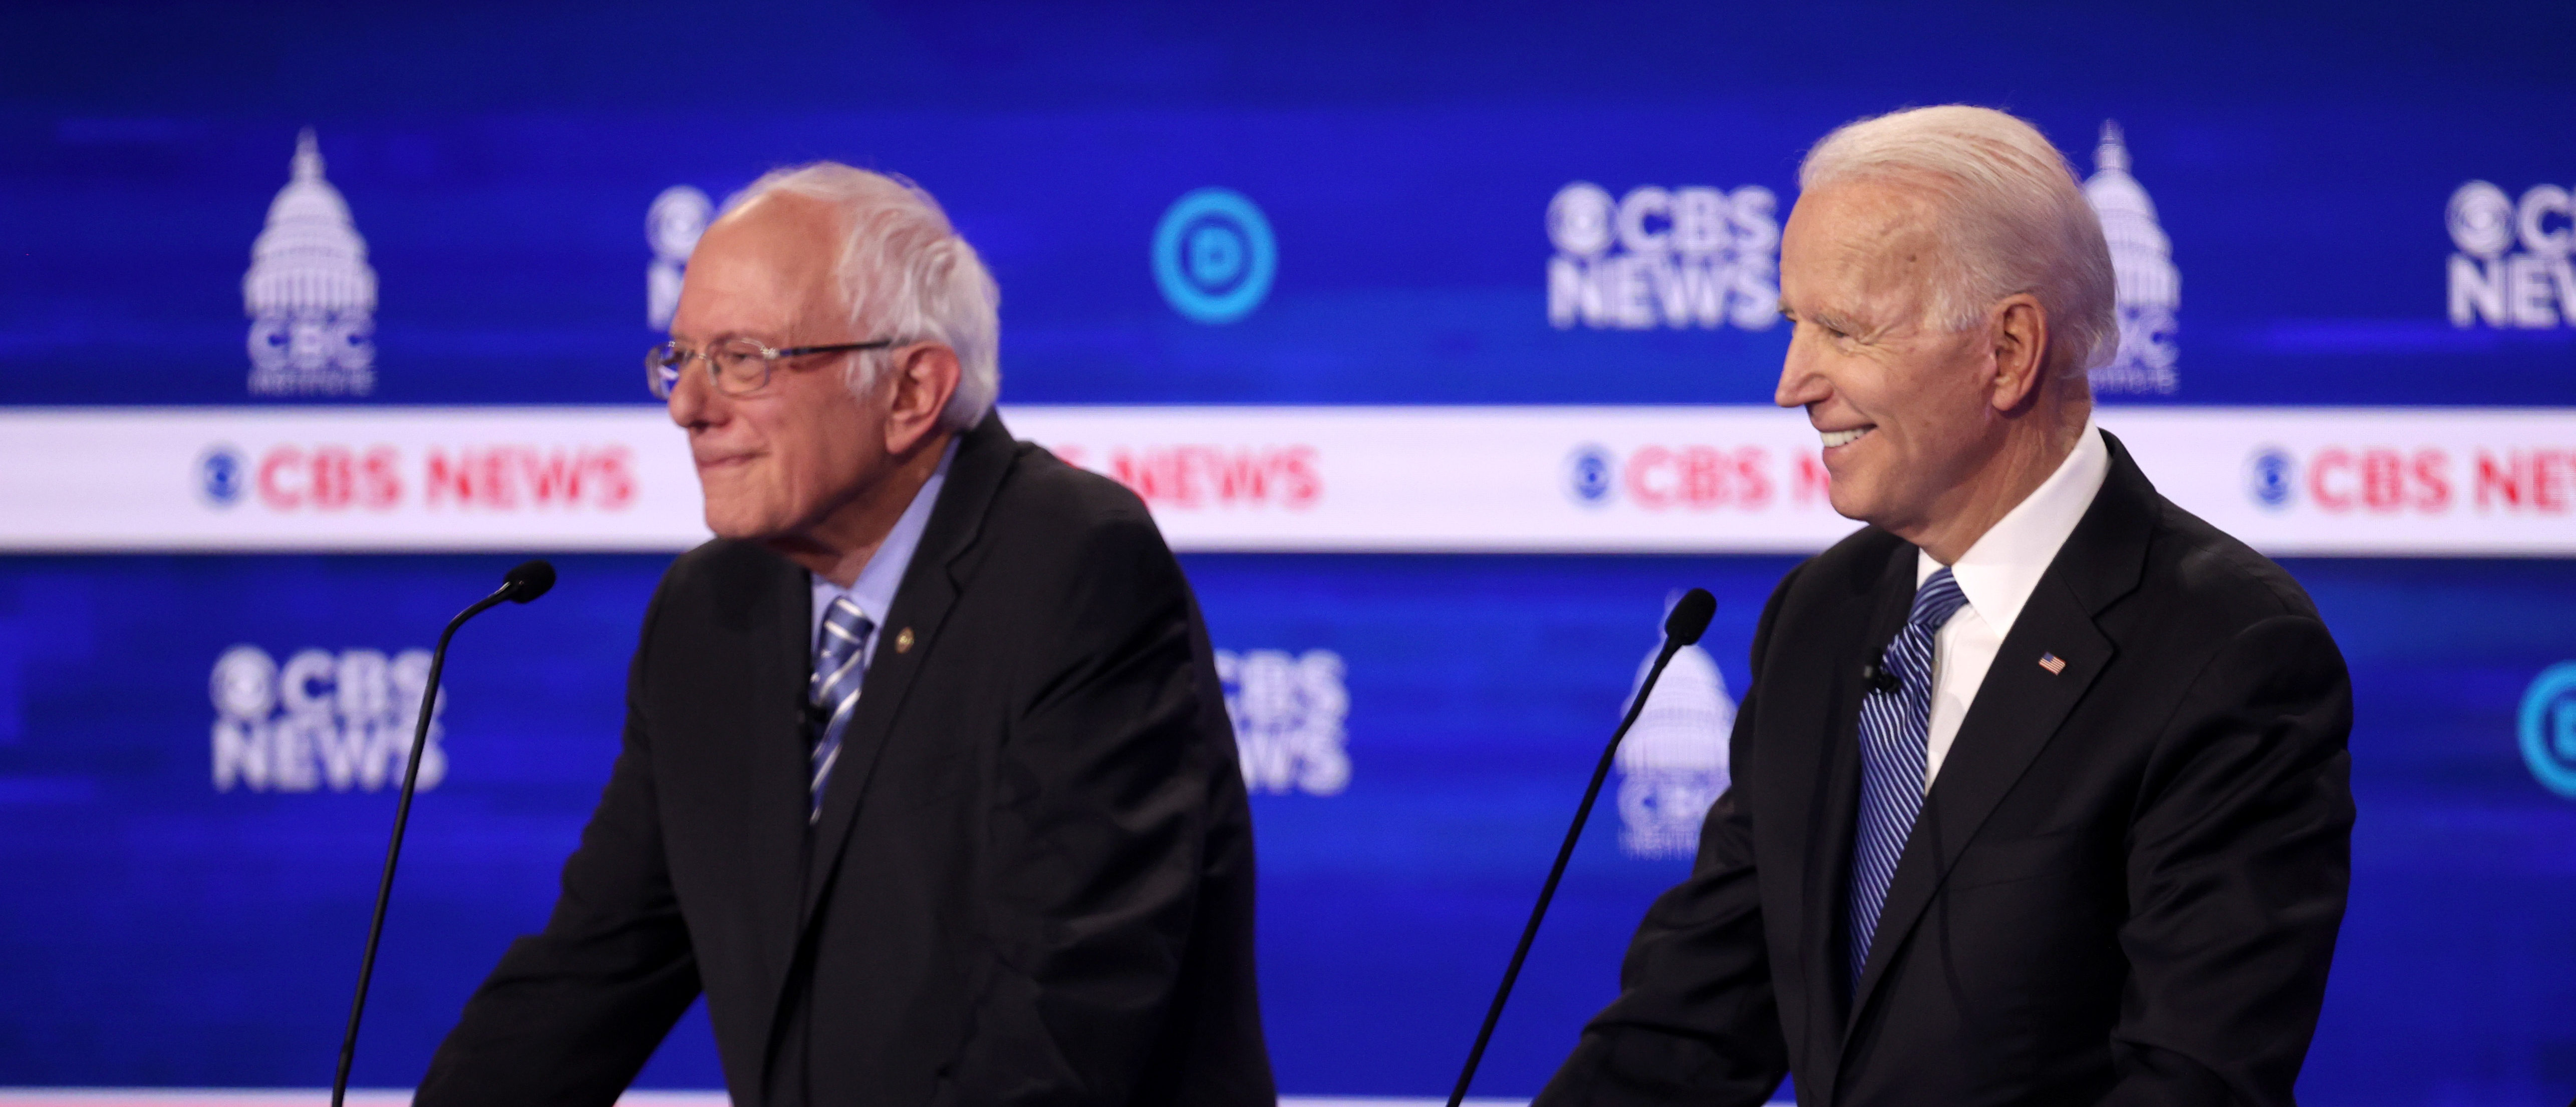 CHARLESTON, SOUTH CAROLINA - FEBRUARY 25: Democratic presidential candidate former Vice President Joe Biden smiles as Sen. Bernie Sanders (I-VT) (L) looks on during the Democratic presidential primary debate at the Charleston Gaillard Center on February 25, 2020 in Charleston, South Carolina. Seven candidates qualified for the debate, hosted by CBS News and Congressional Black Caucus Institute, ahead of South Carolina’s primary in four days. (Photo by Win McNamee/Getty Images)